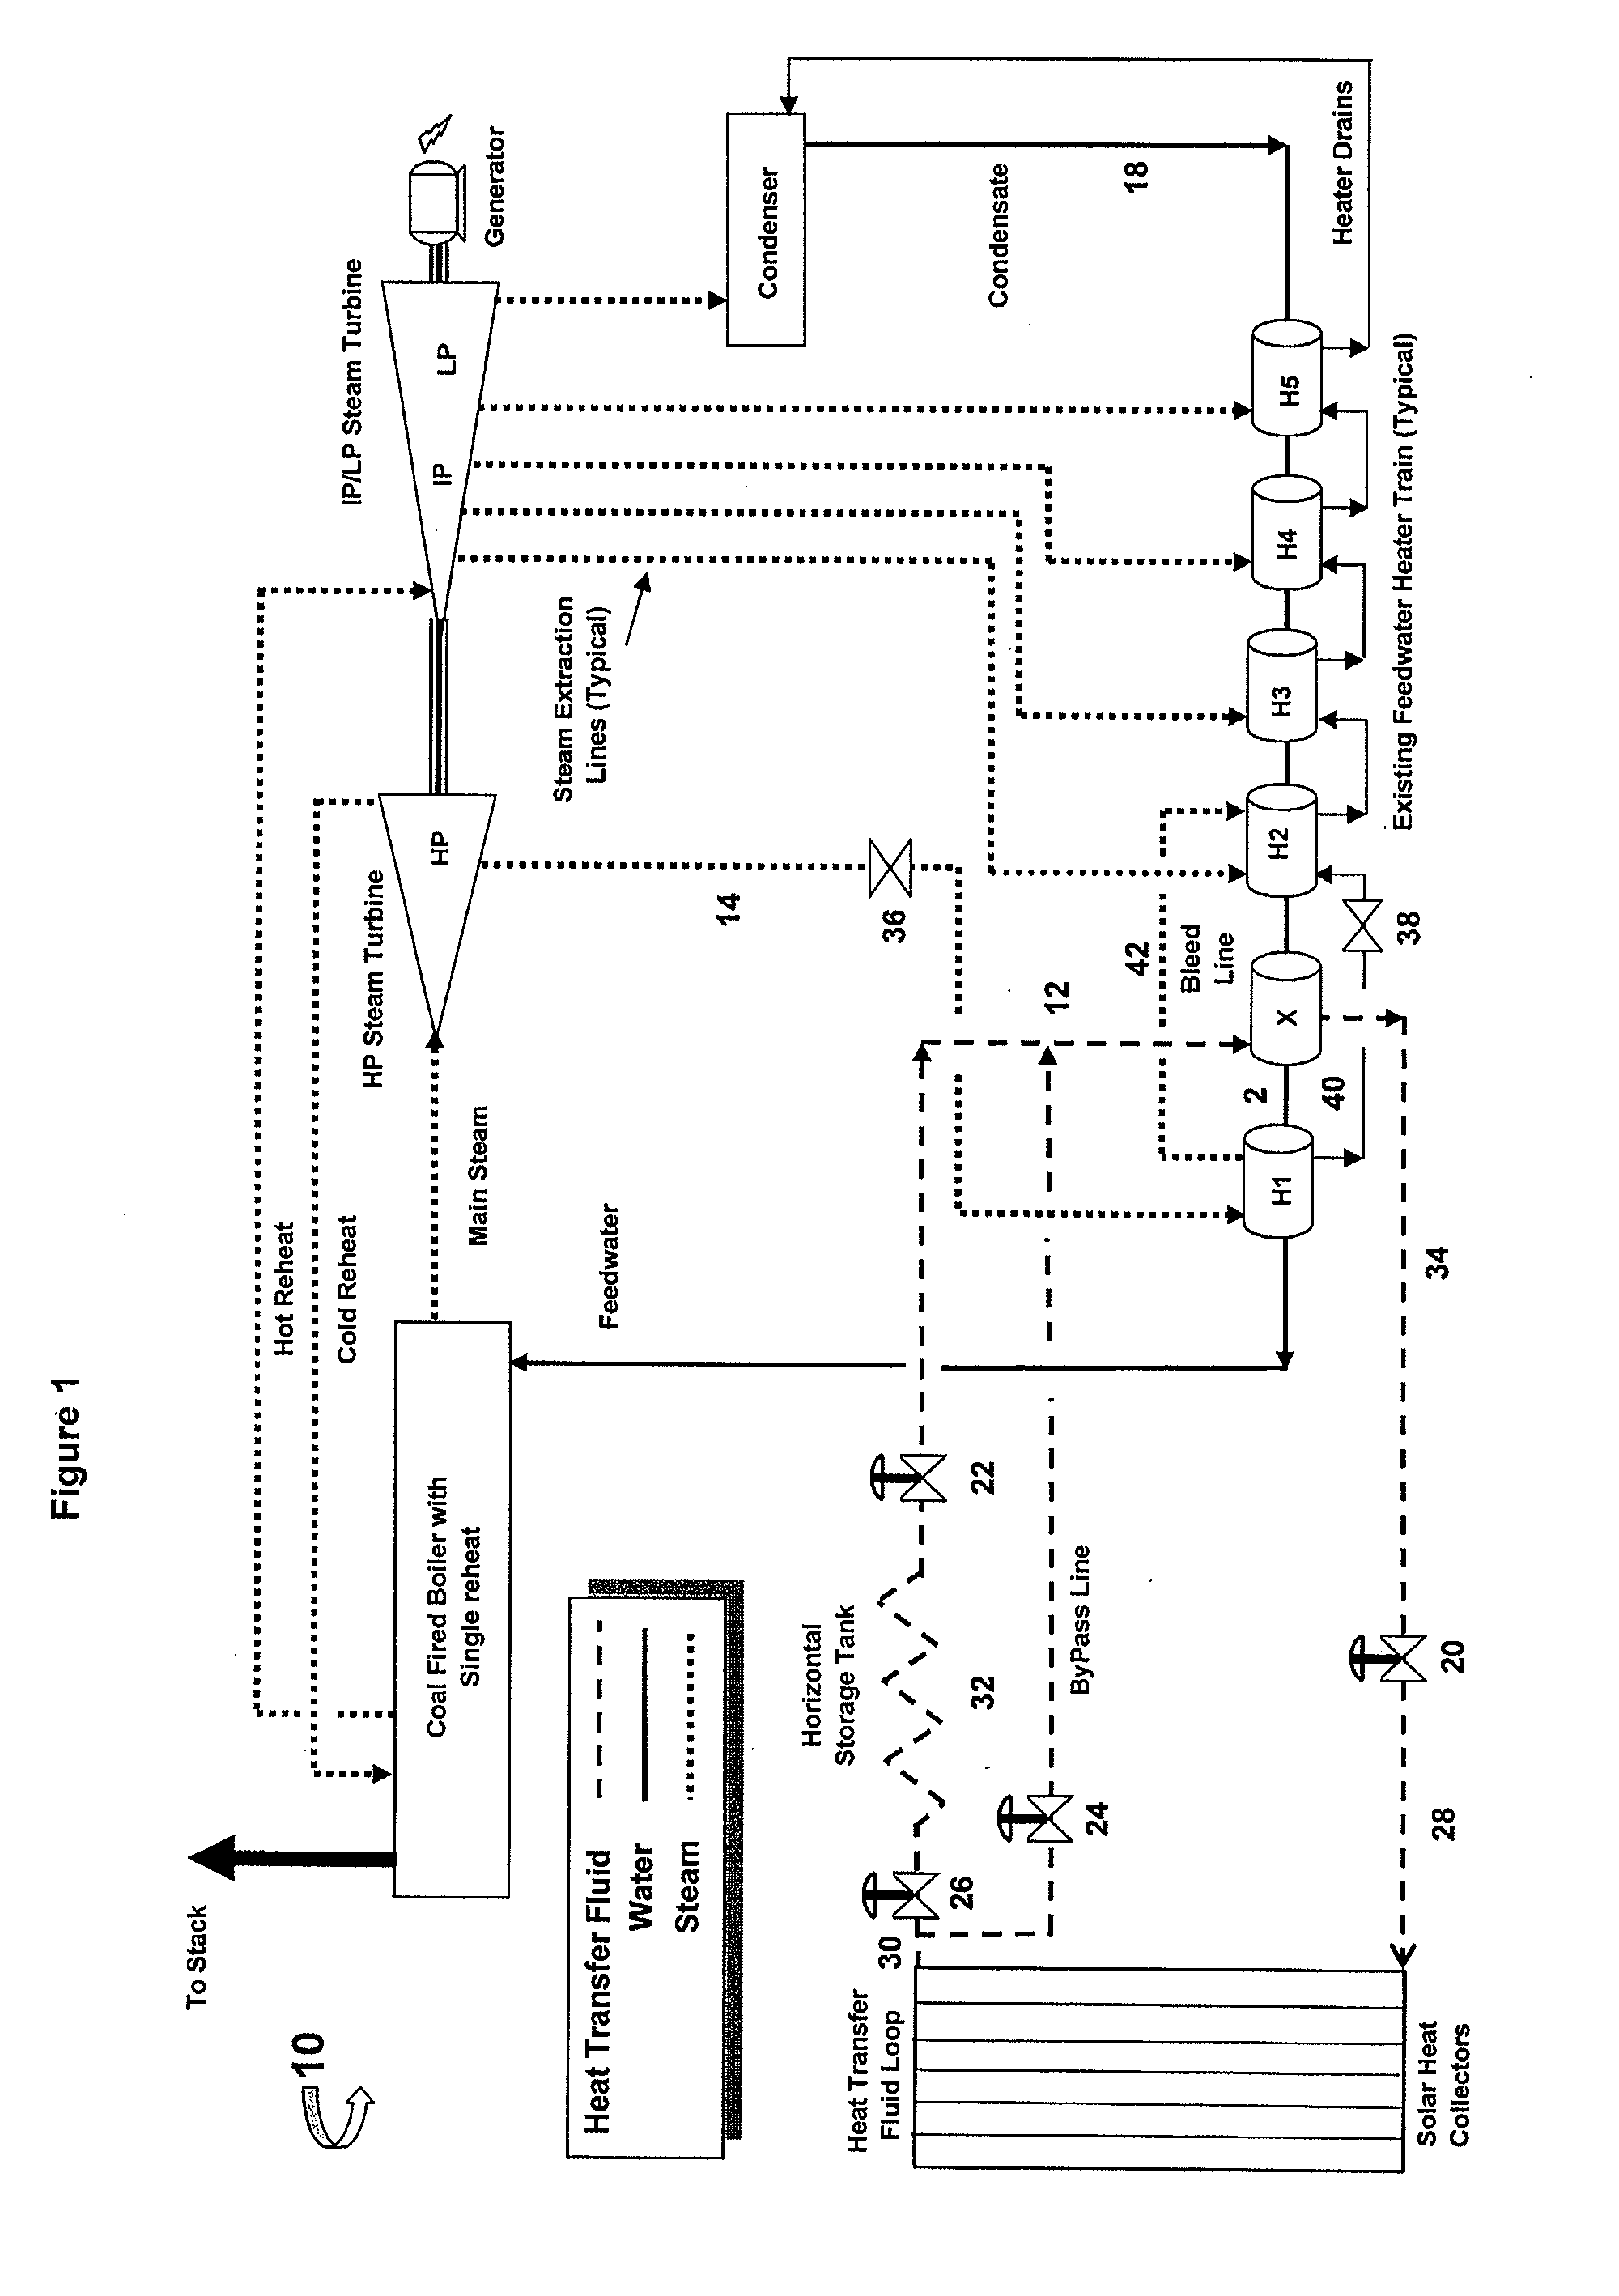 Method of measurement, control, and regulation for the solar thermal hybridization of a fossil fired rankine cycle